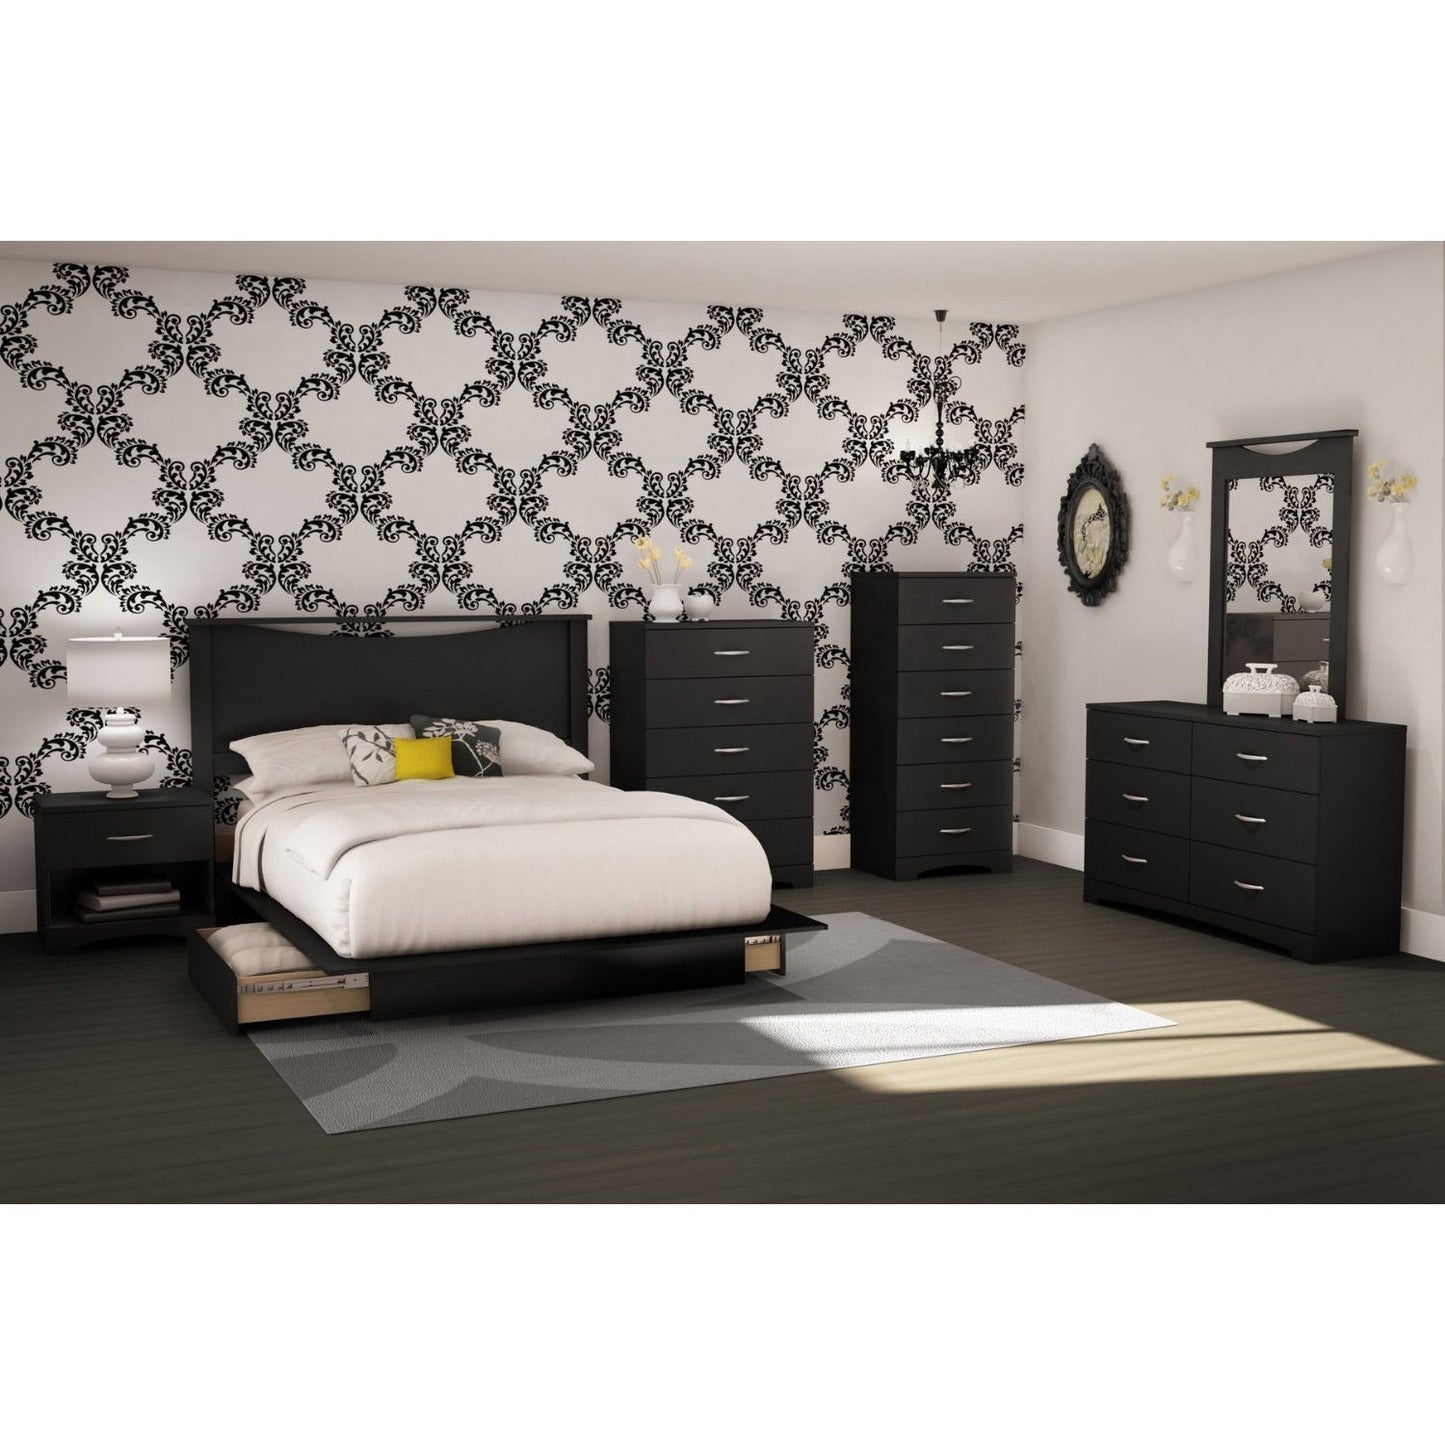 Bedroom > Nightstand And Dressers - Black 6-Drawer Lingerie Chest For Contemporary Bedroom